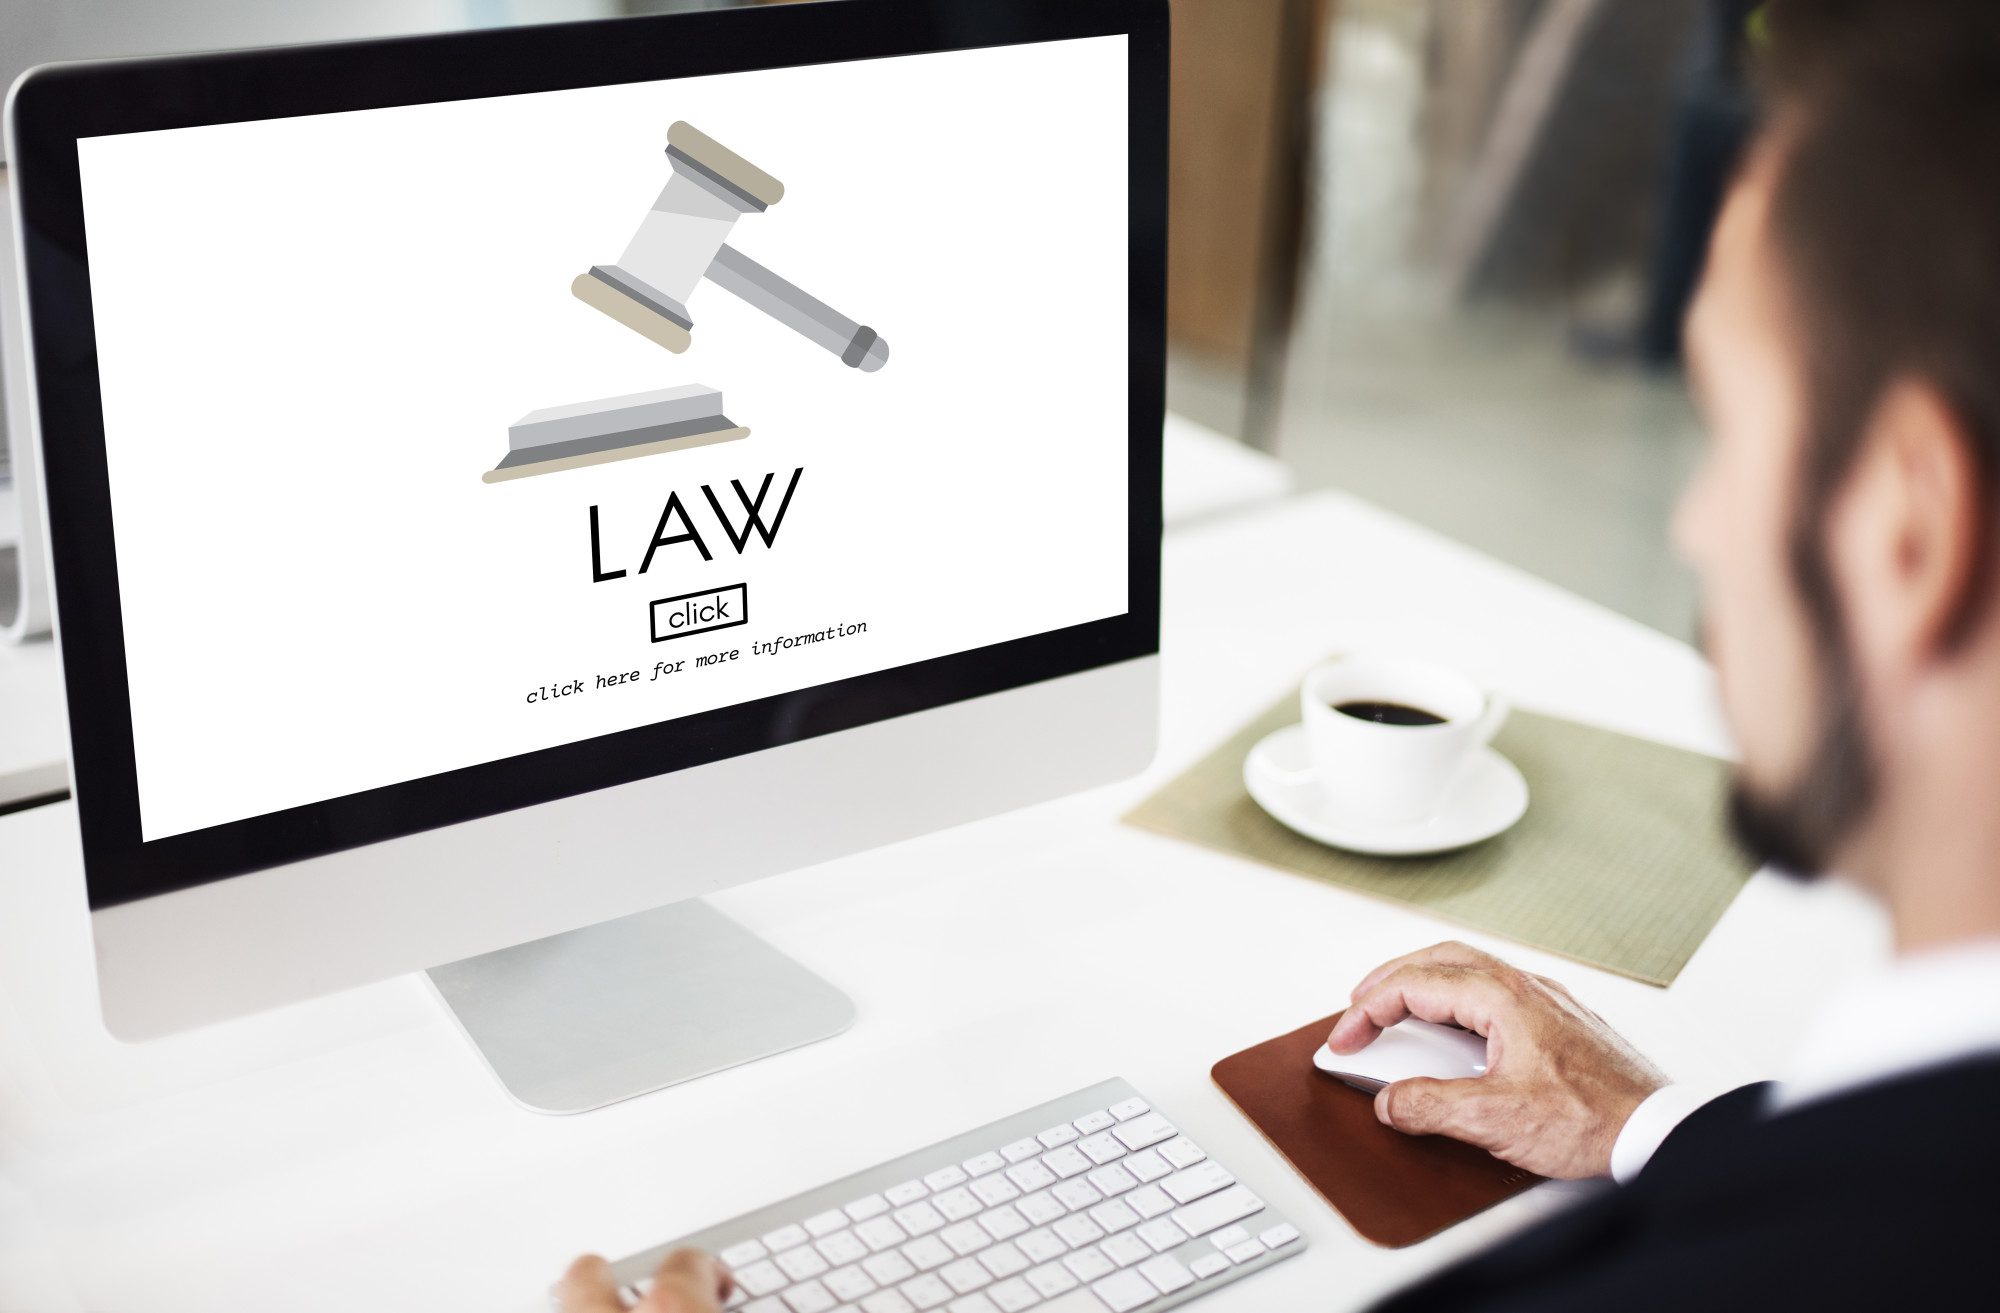 3 Factors to Consider When Advertising Law Services Online